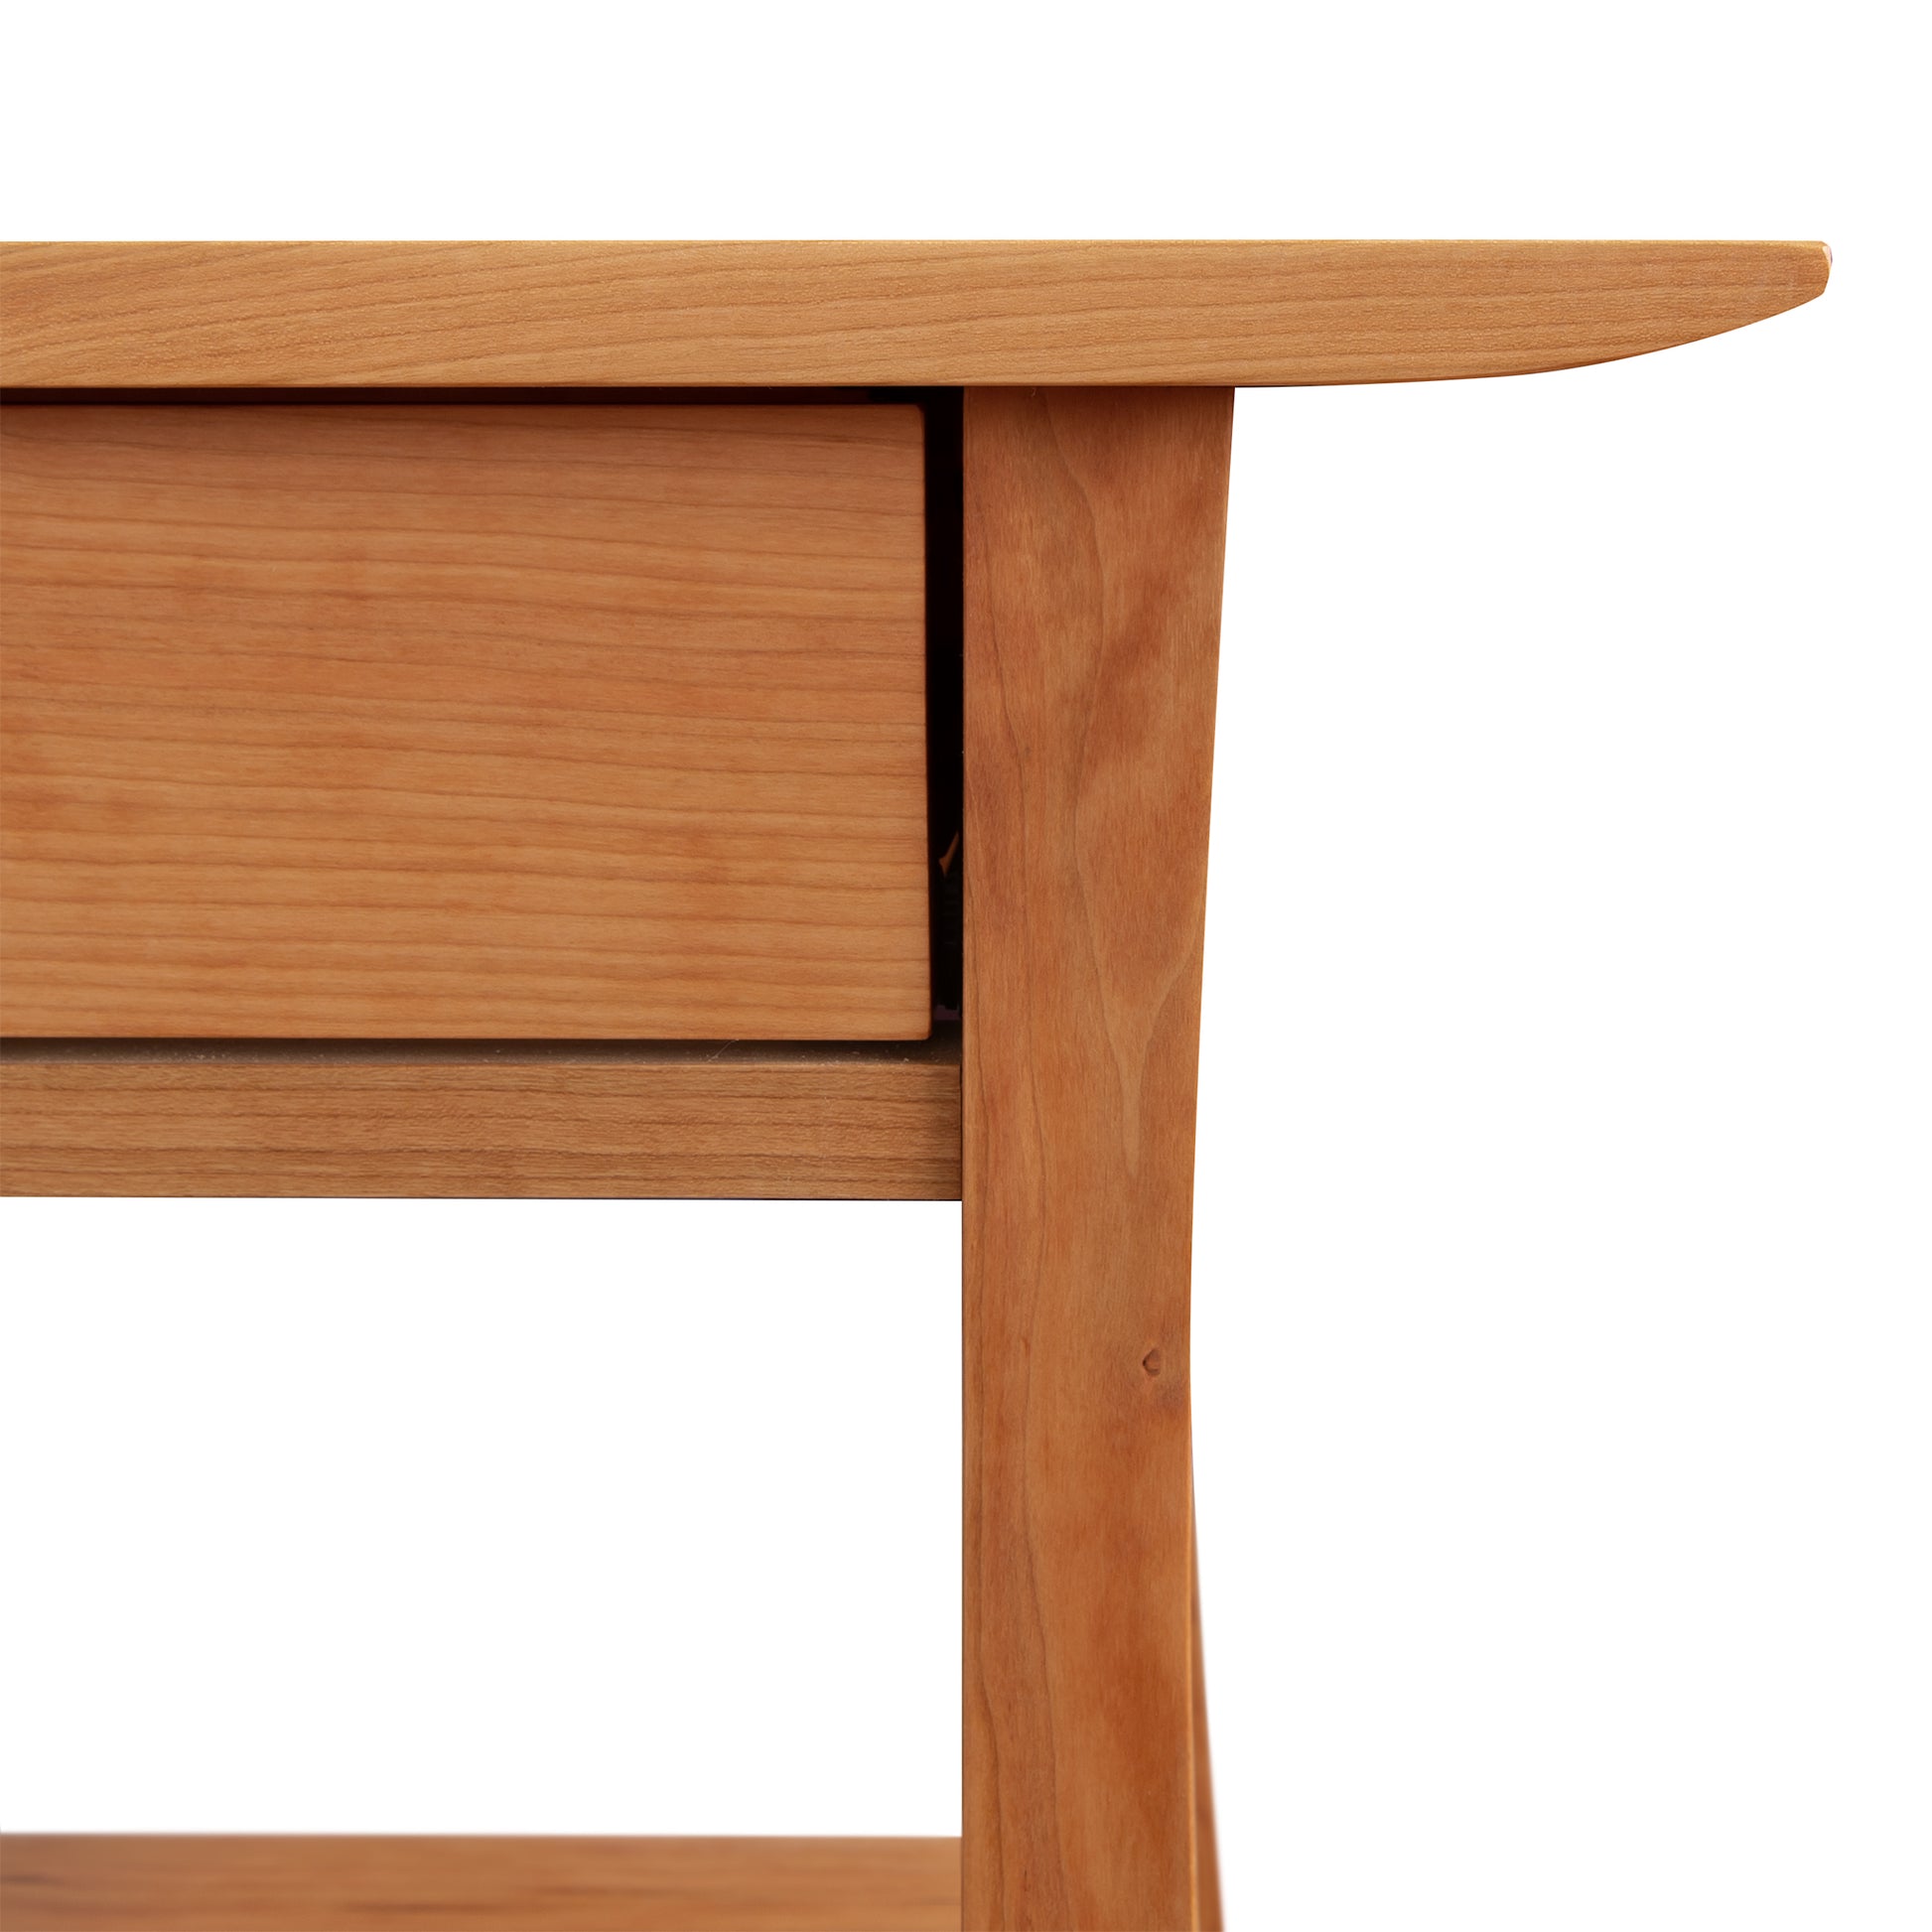 Close-up of a Vermont Furniture Designs Contemporary Craftsman Console Coffee Table corner showing detail of the grain and joinery, featuring solid hardwoods with an eco-friendly oil finish.